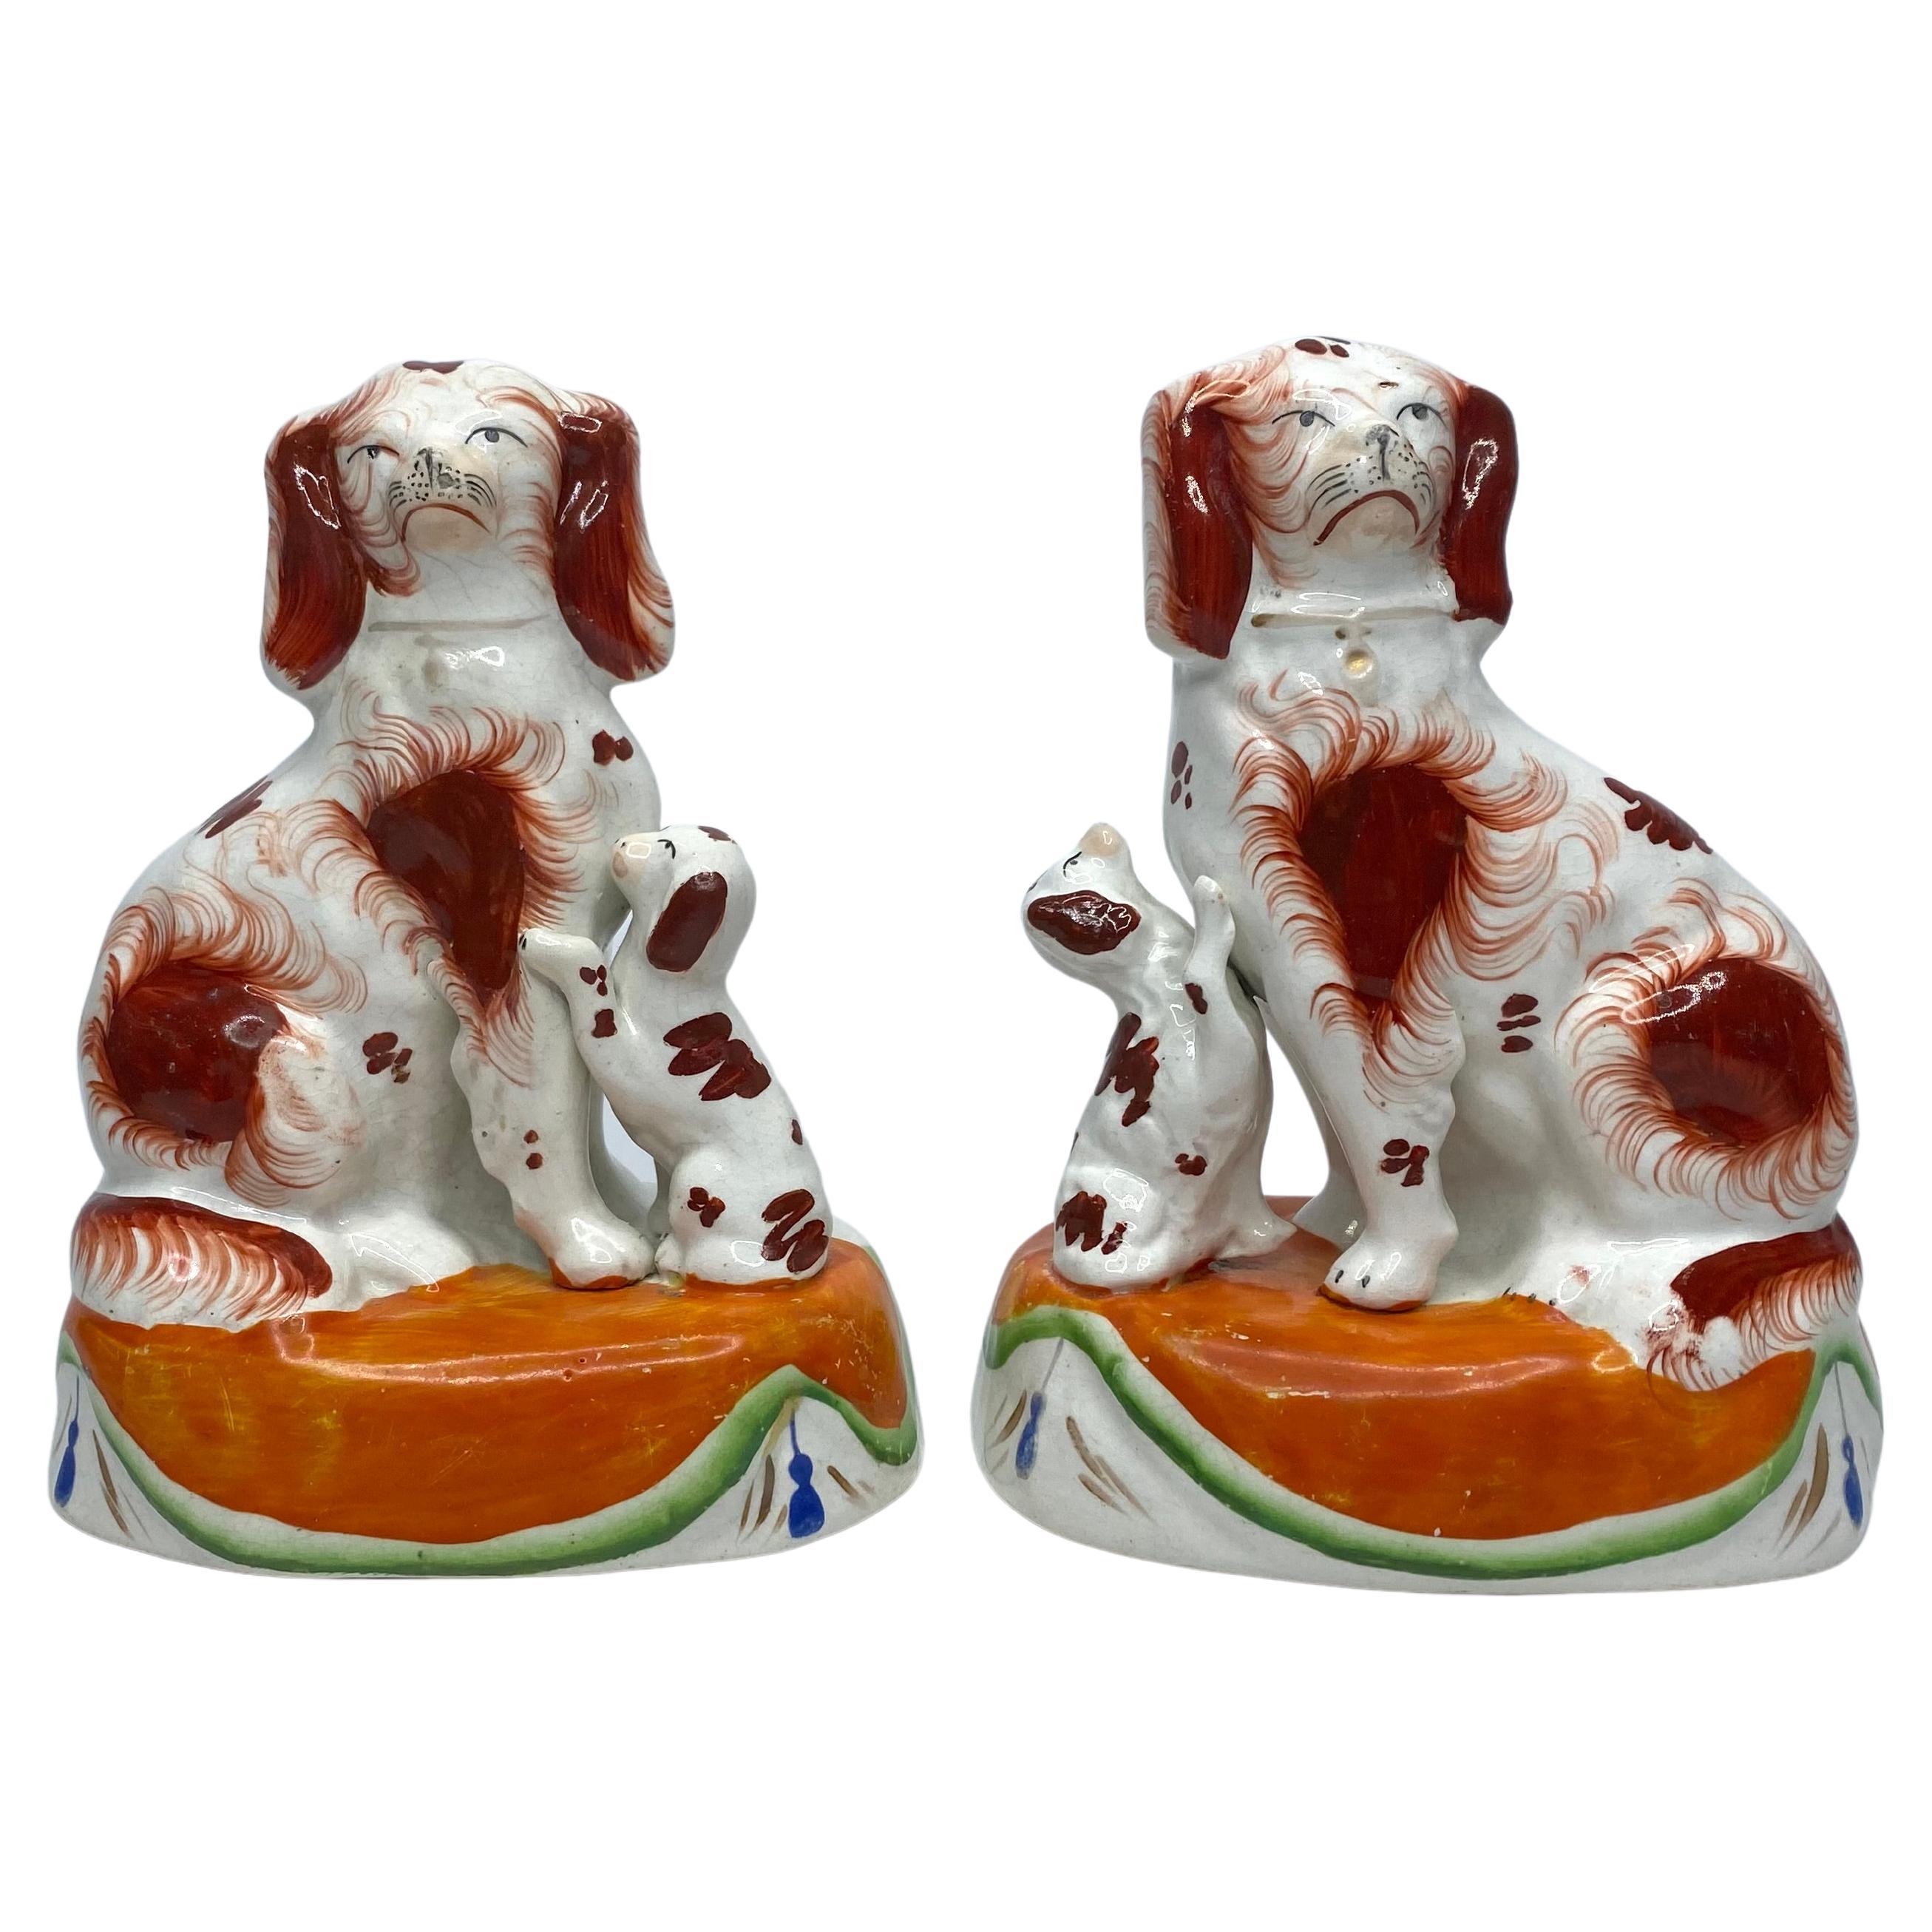 Pair Staffordshire Spaniels with puppies, c. 1850.